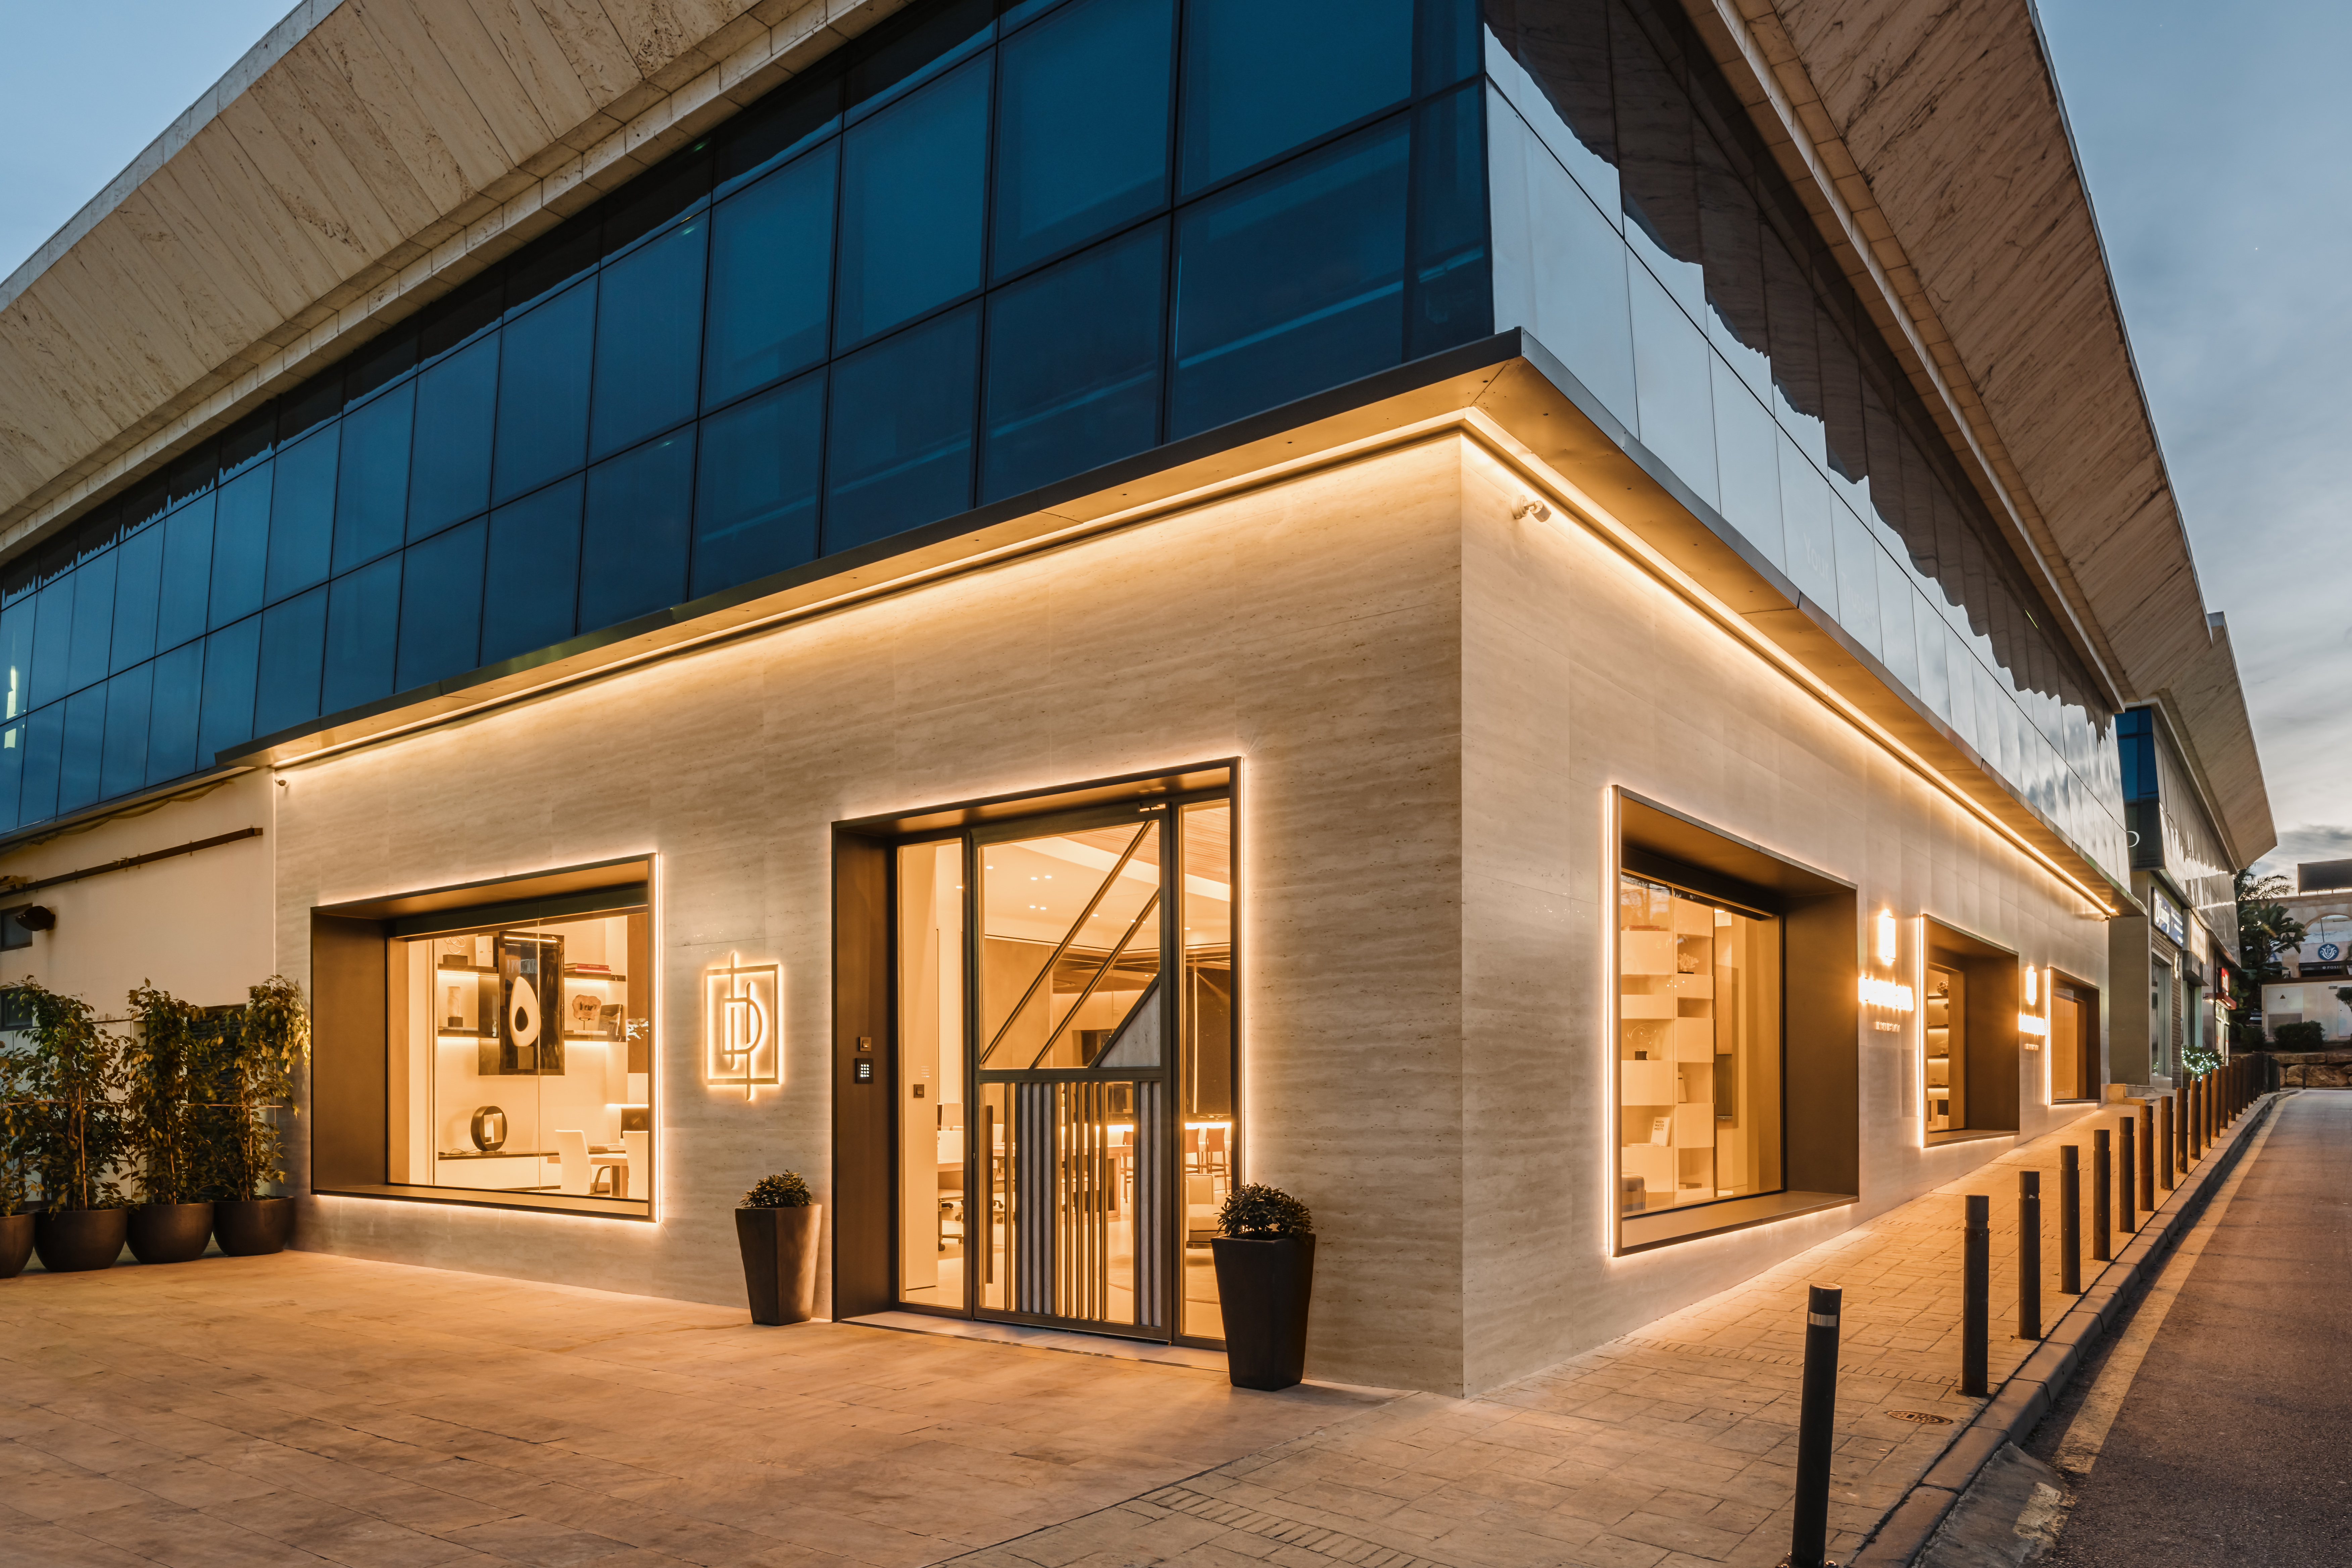 Photograph of the exterior facade of the Drumelia Office at night in Marbella